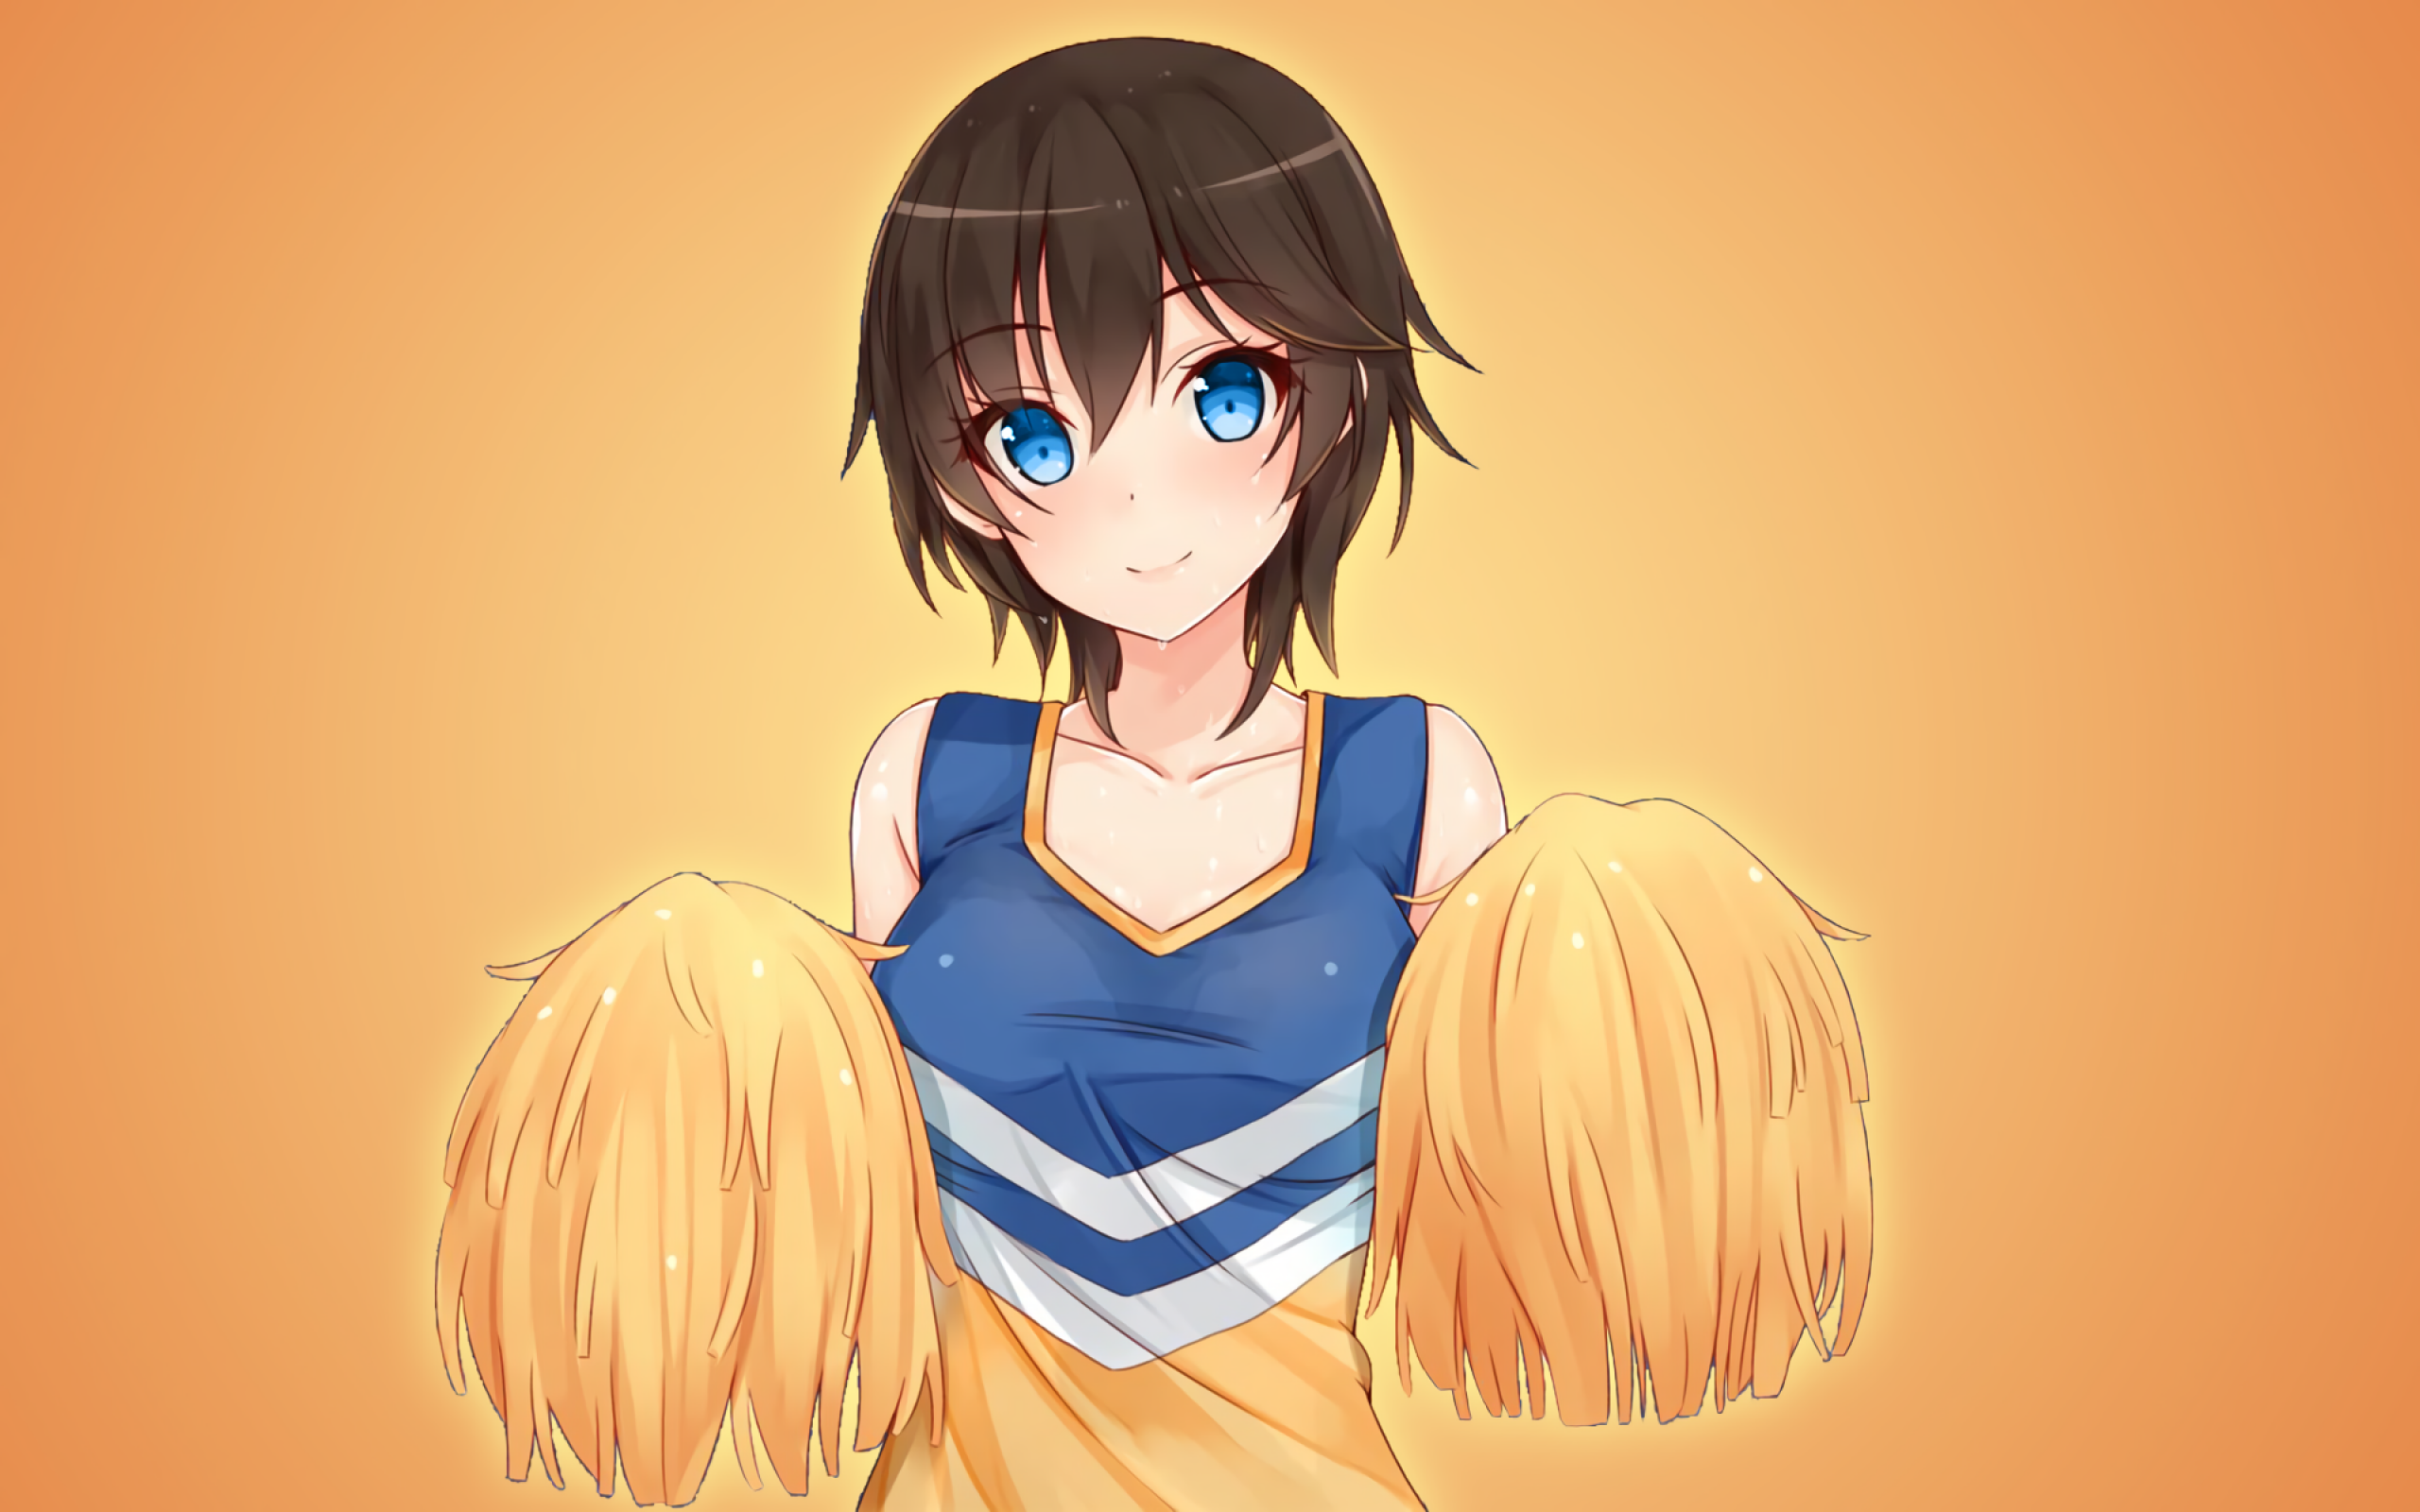 Download 2560x1600 Anime Girl, Brown Hair, Cheer Girl, Blue Eyes Wallpaper for MacBook Pro 13 inch